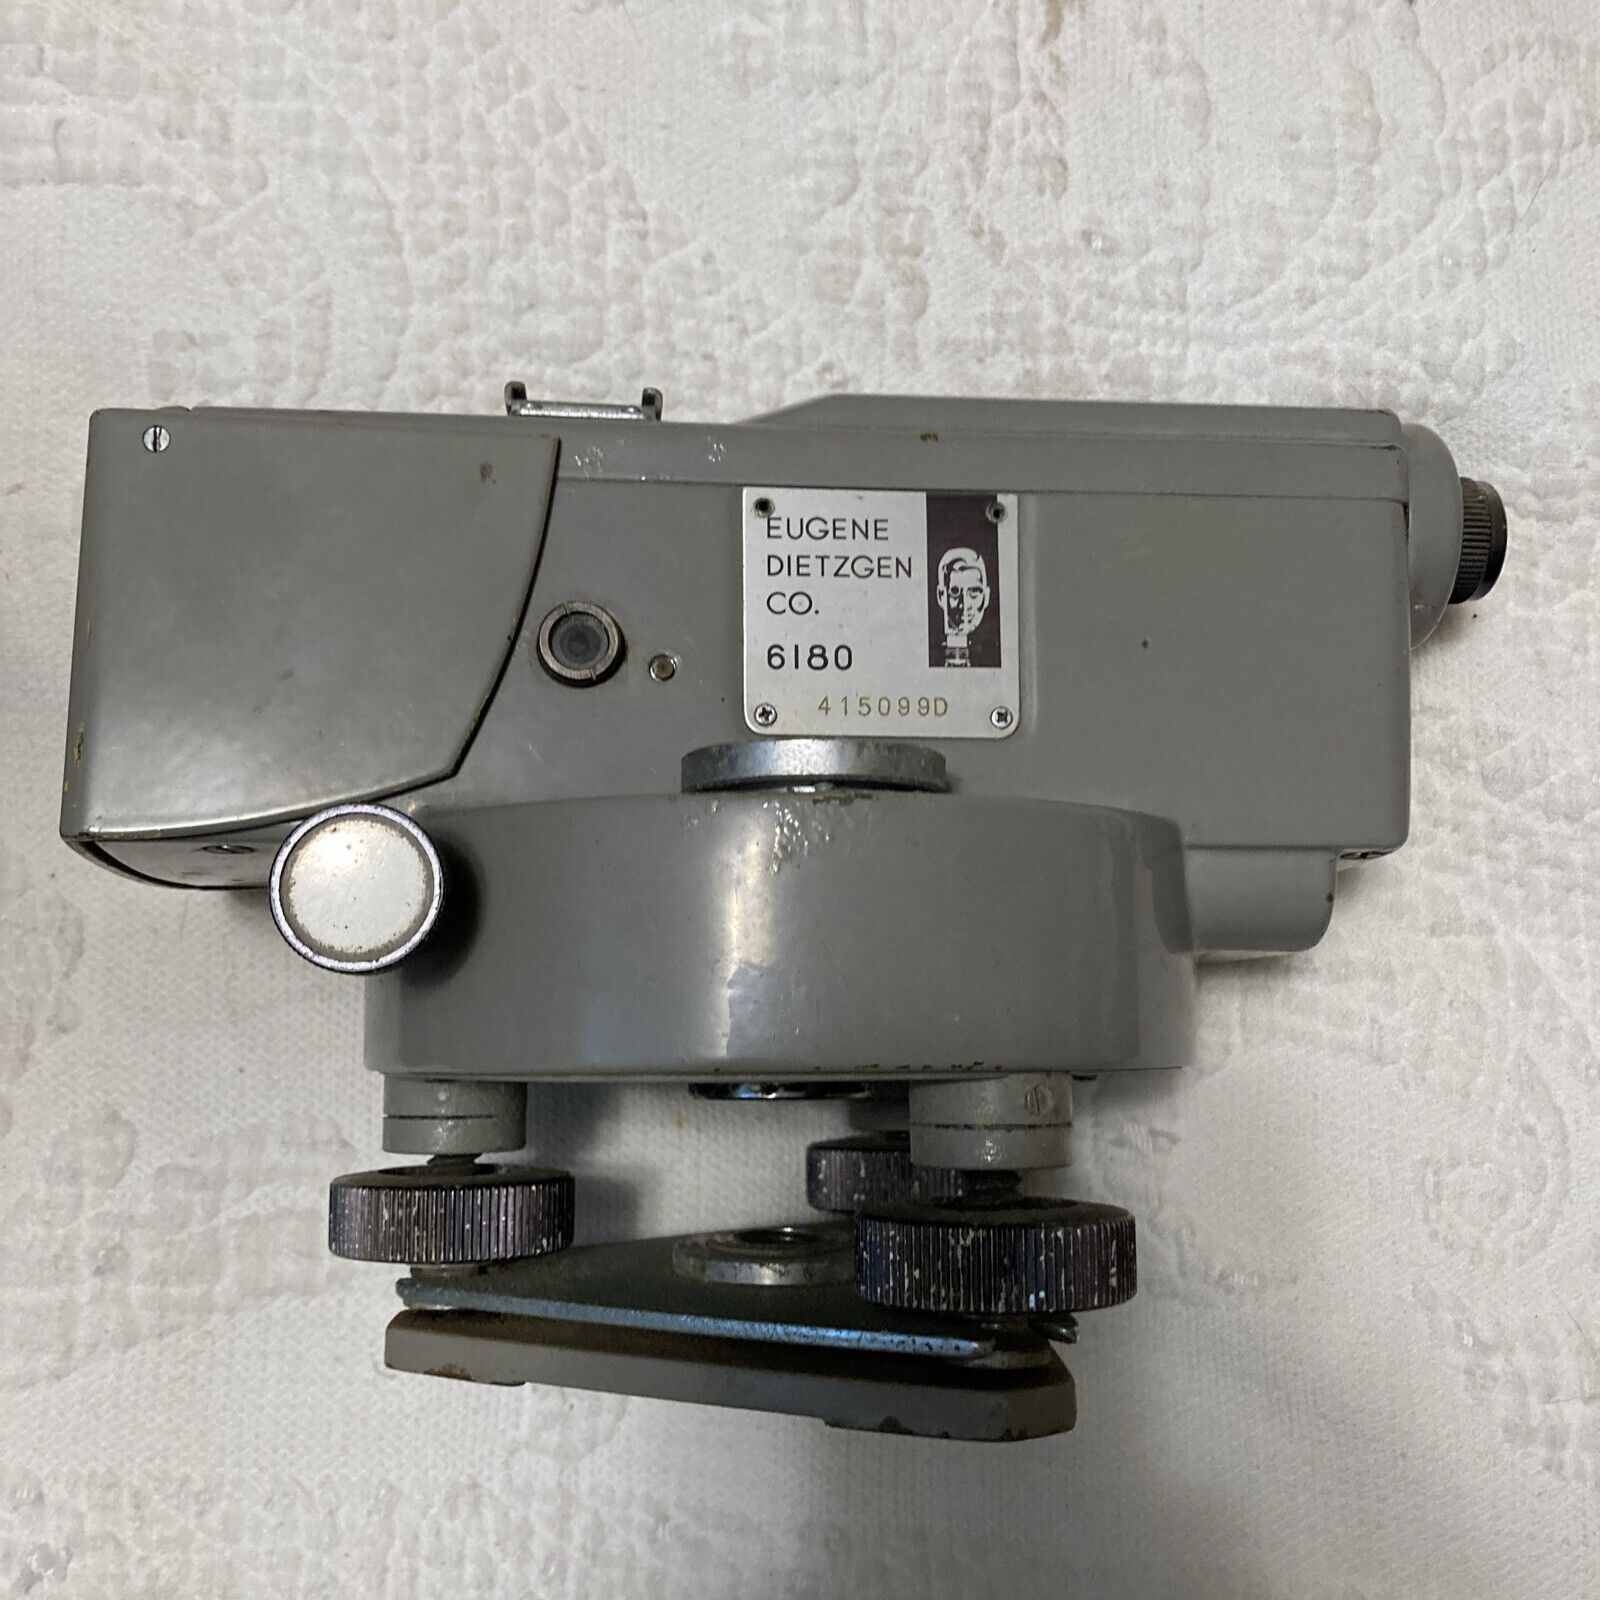 Dietzgen Model 6180 Automatic Level Untested